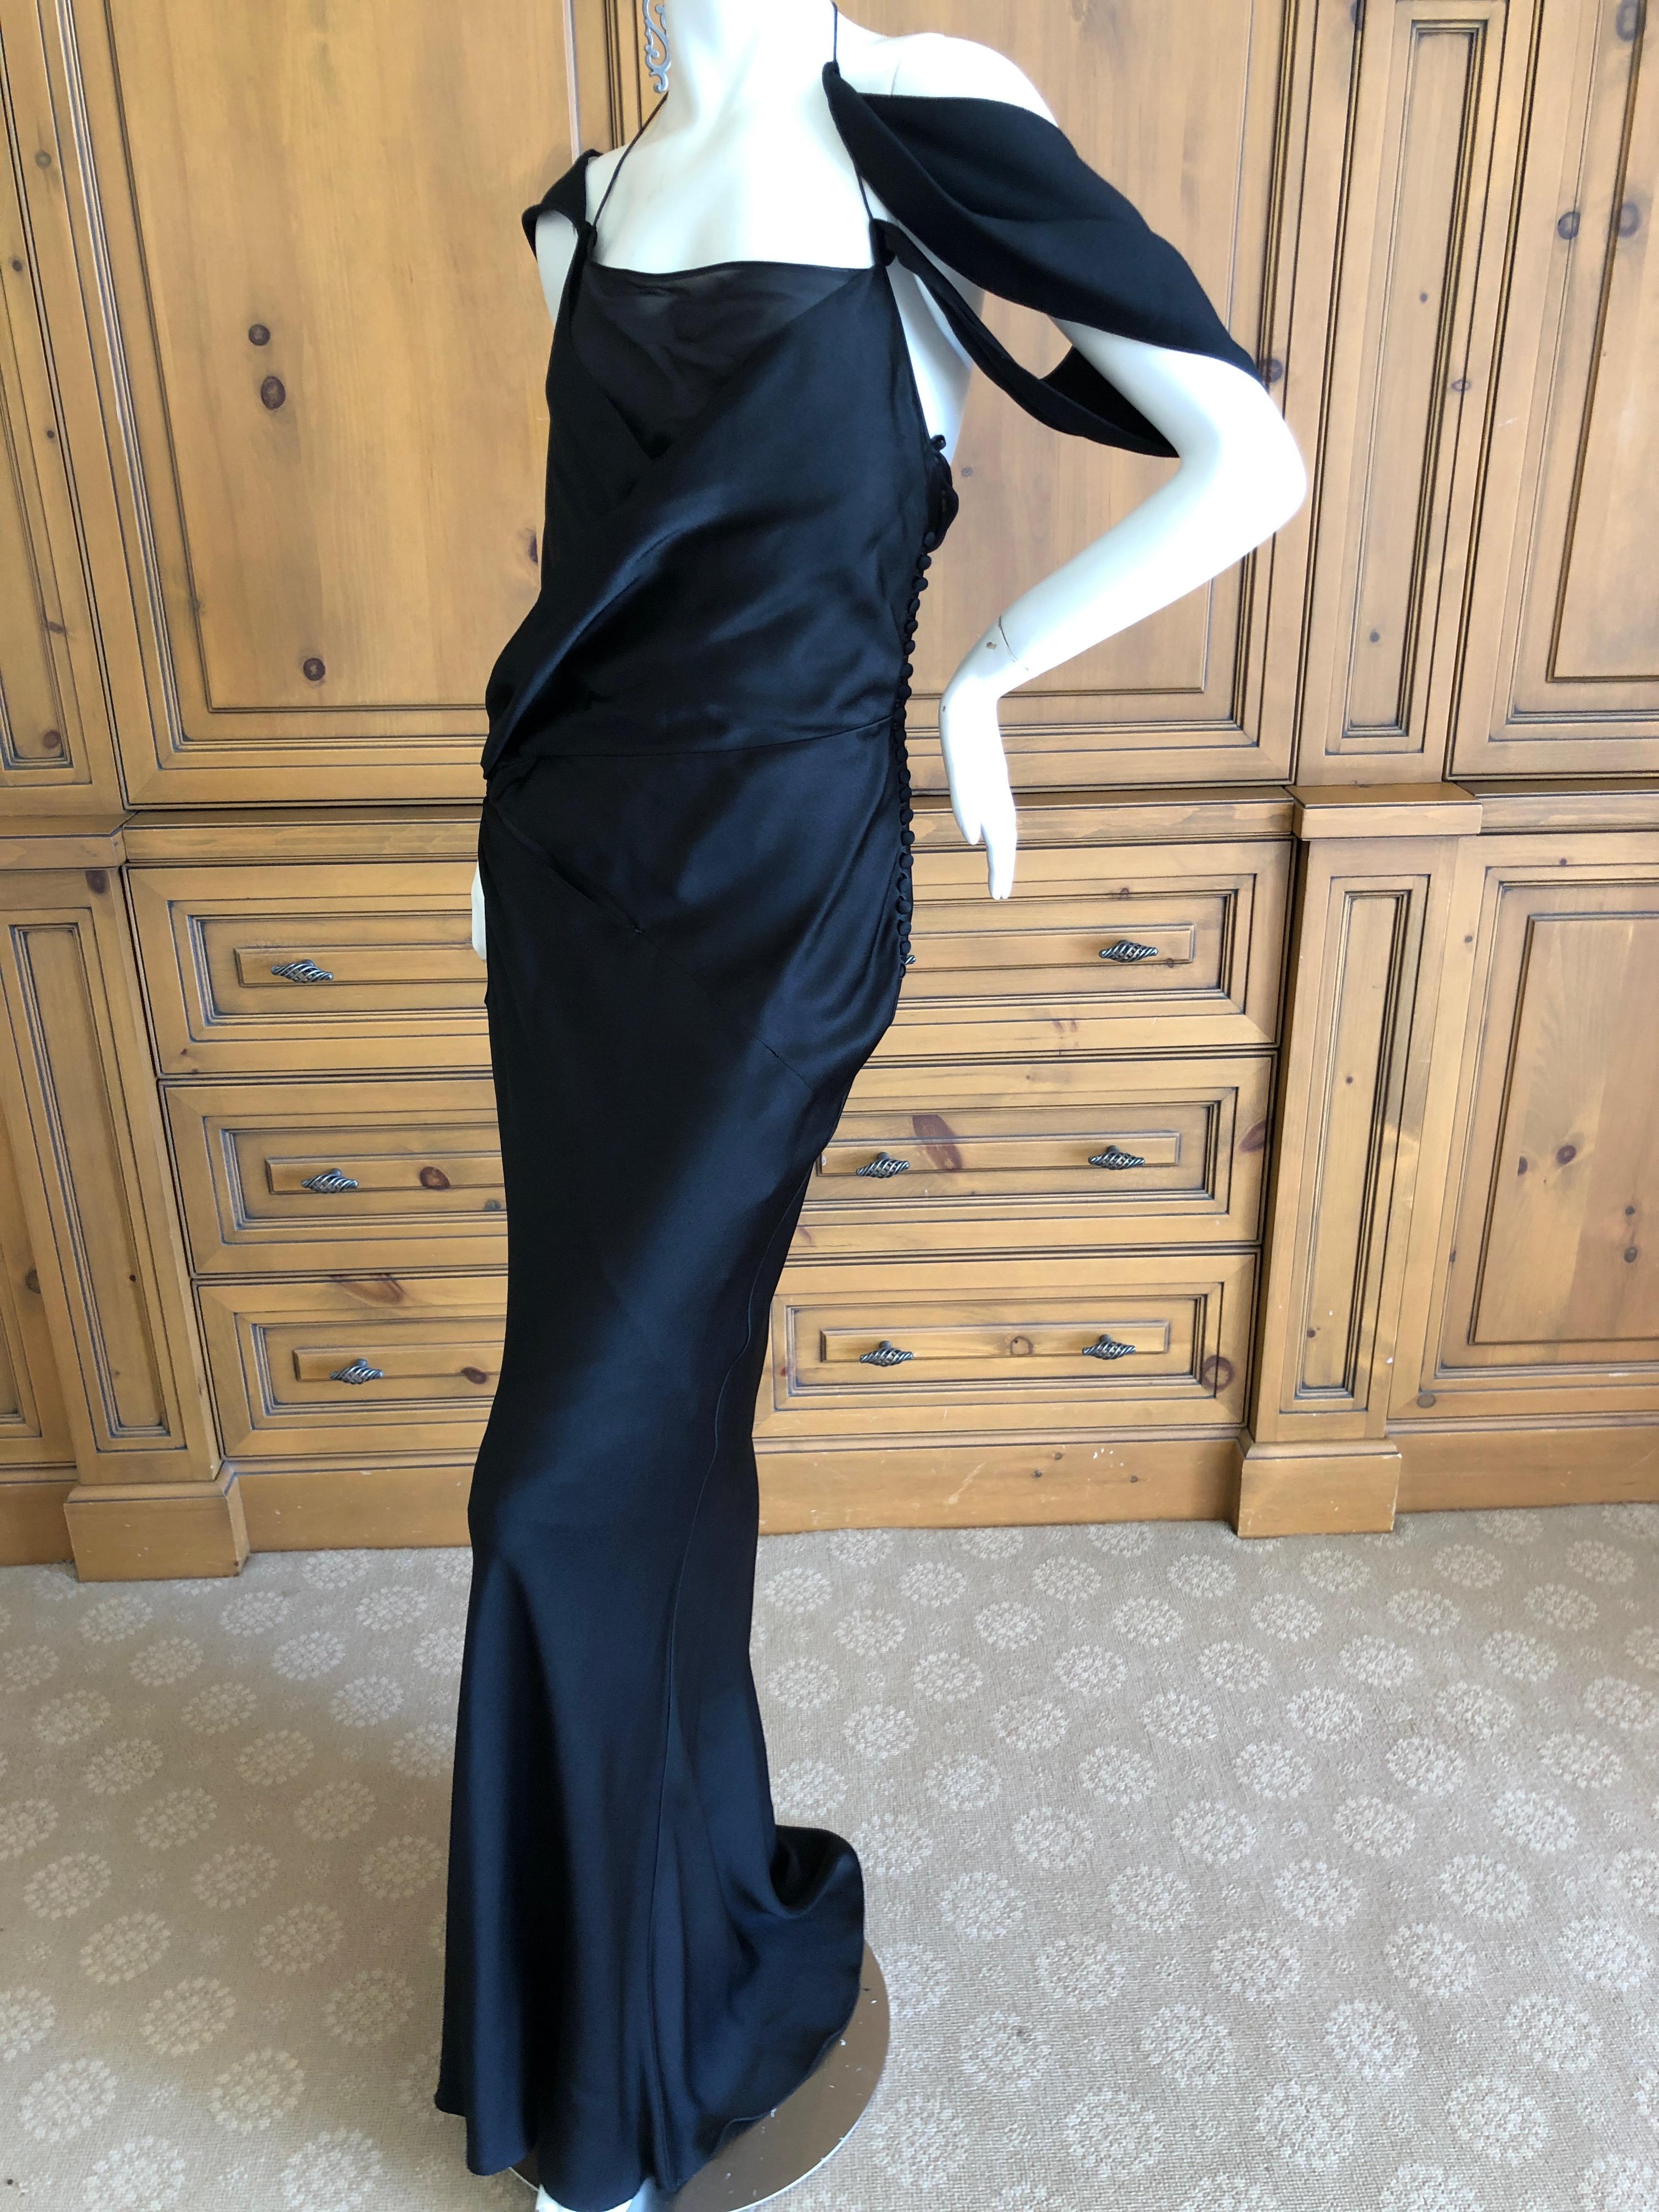 John Galliano Spring 2000 Black Bias Cut Evening Dress with Sheer Inserts Sz 42 For Sale 2